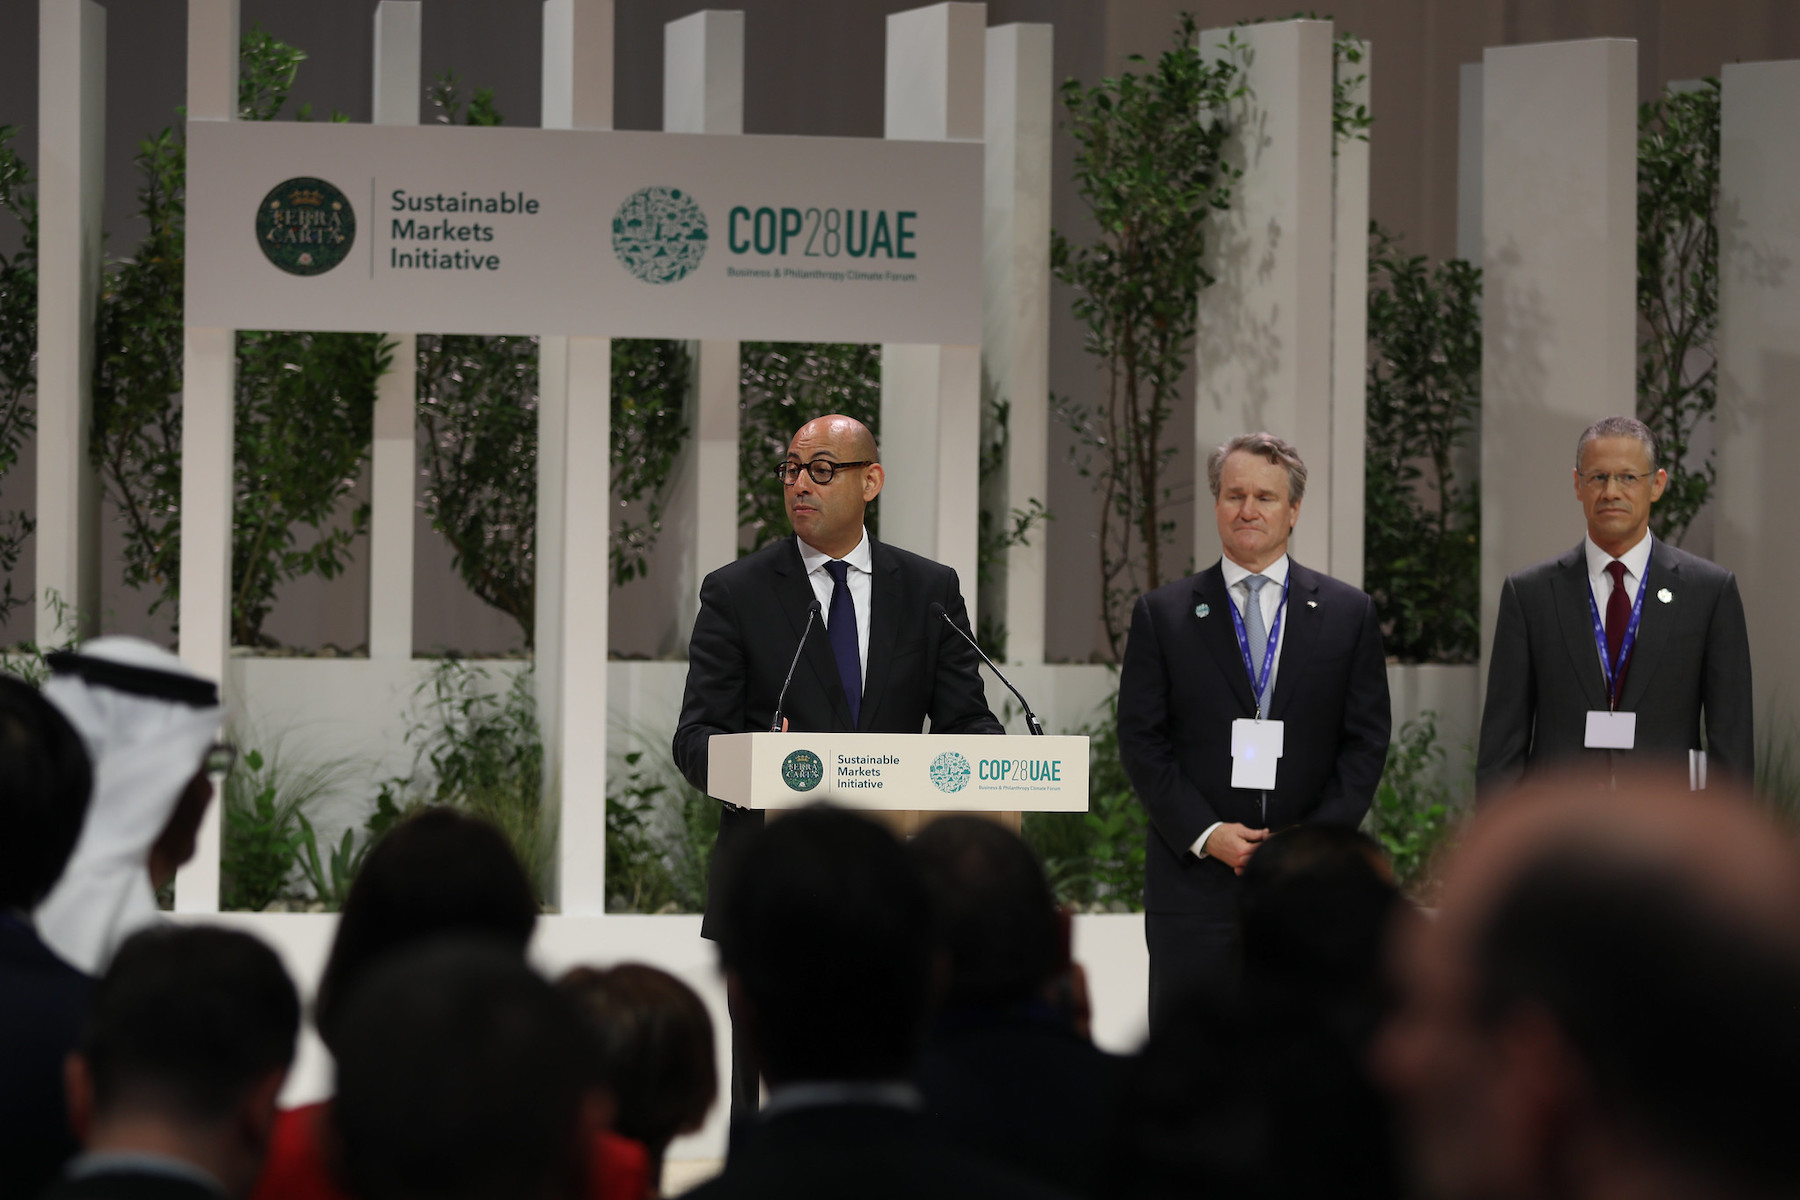 A man stands at a podium speaking to a crowd. Behind him is a sign that says "COP28UAE"